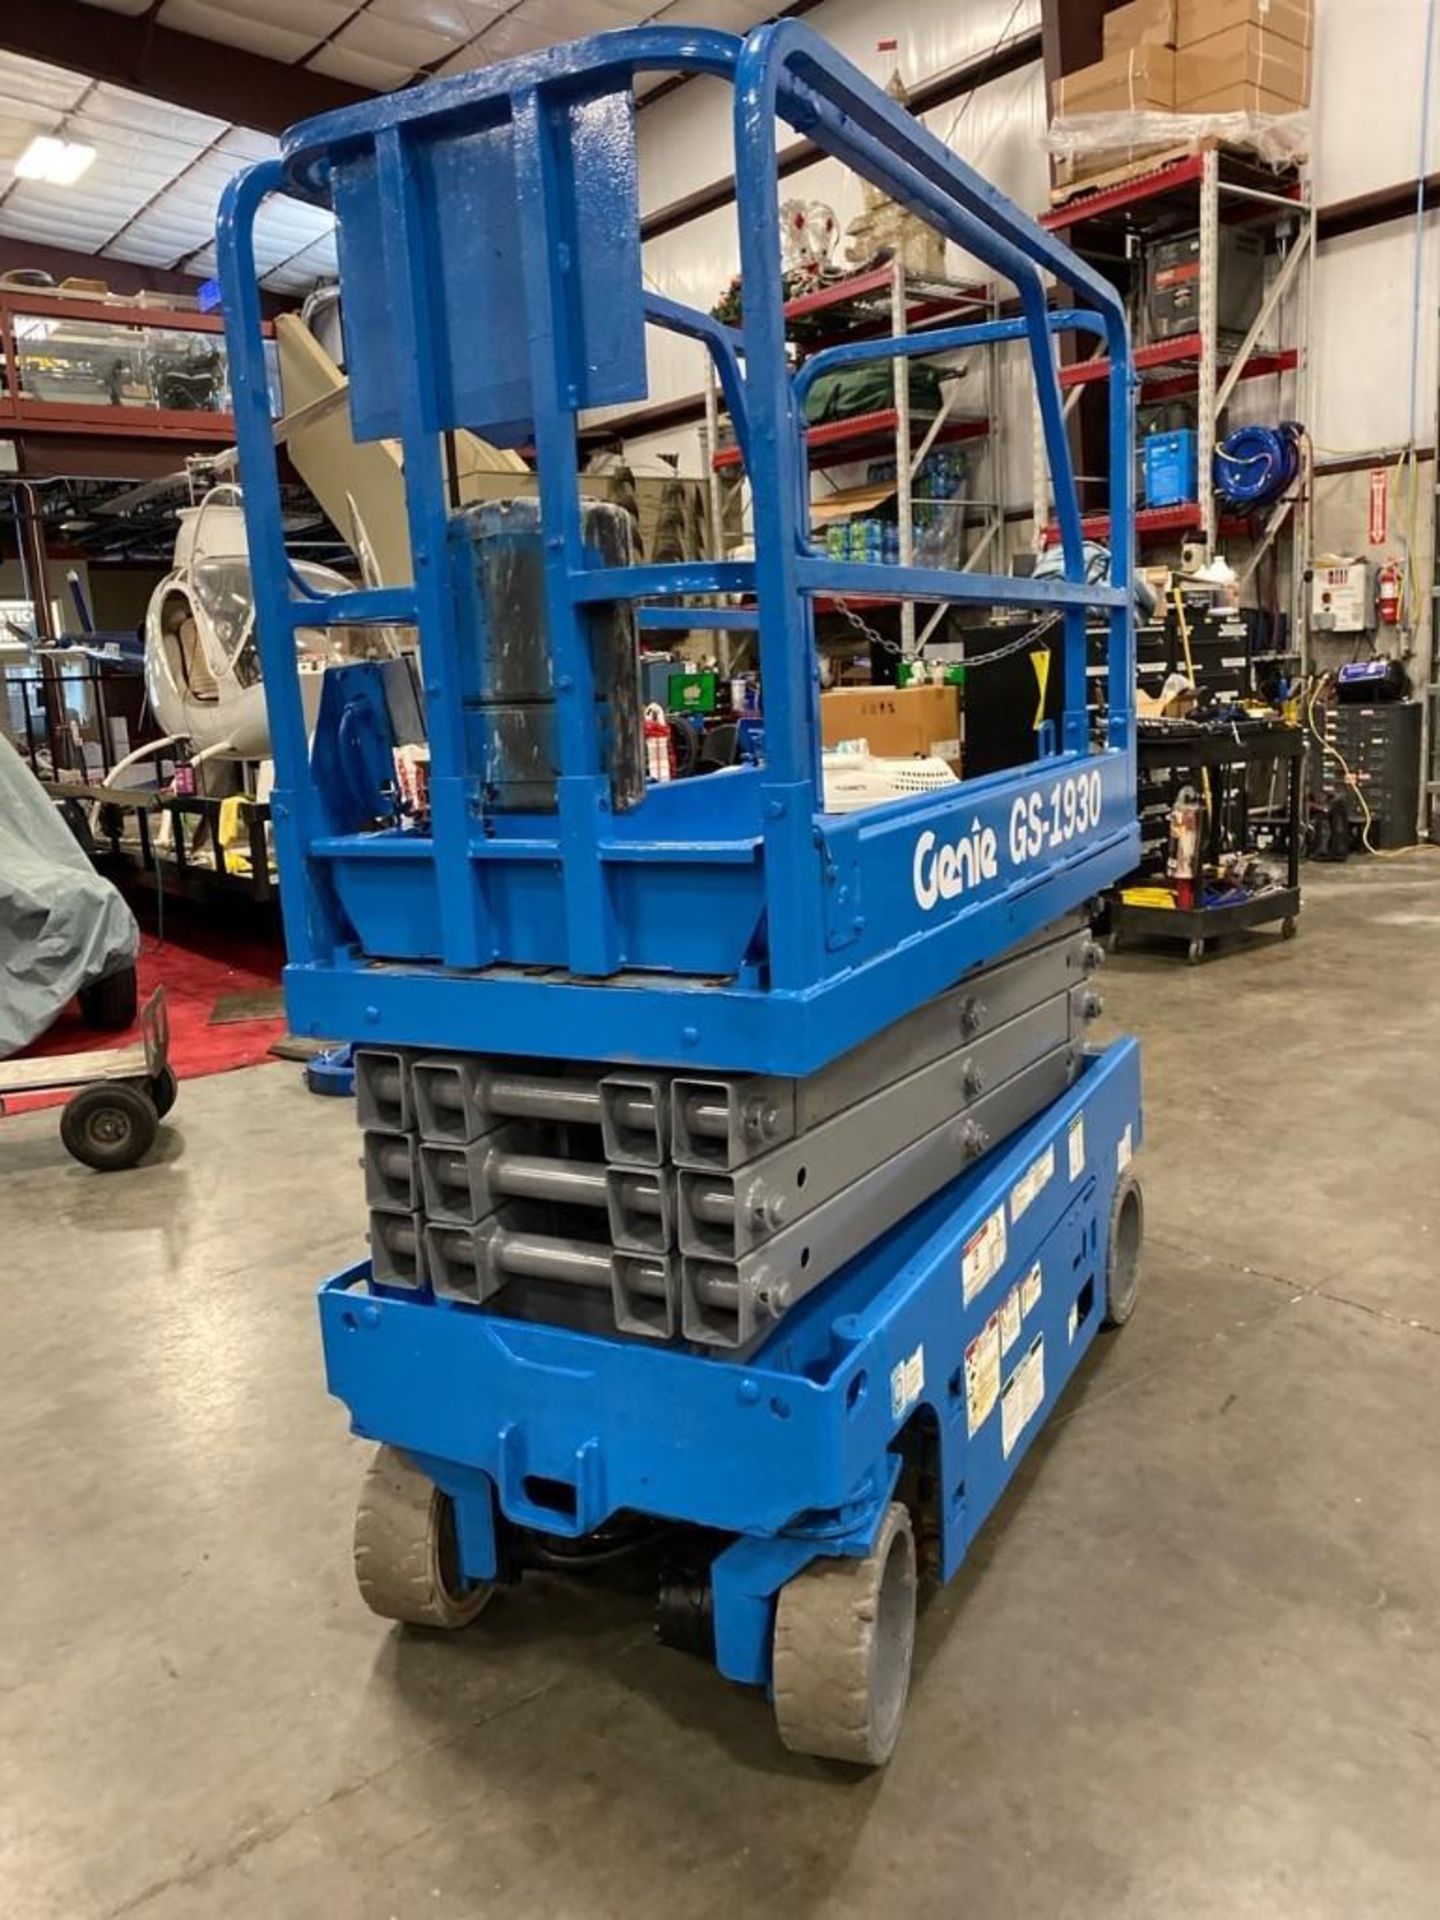 2013 GENIE GS-1930 ELECTRIC SCISSOR LIFT, SELF PROPELLED, 19' PLATFORM HEIGHT, BUILT IN BATTERY CHAR - Image 3 of 7